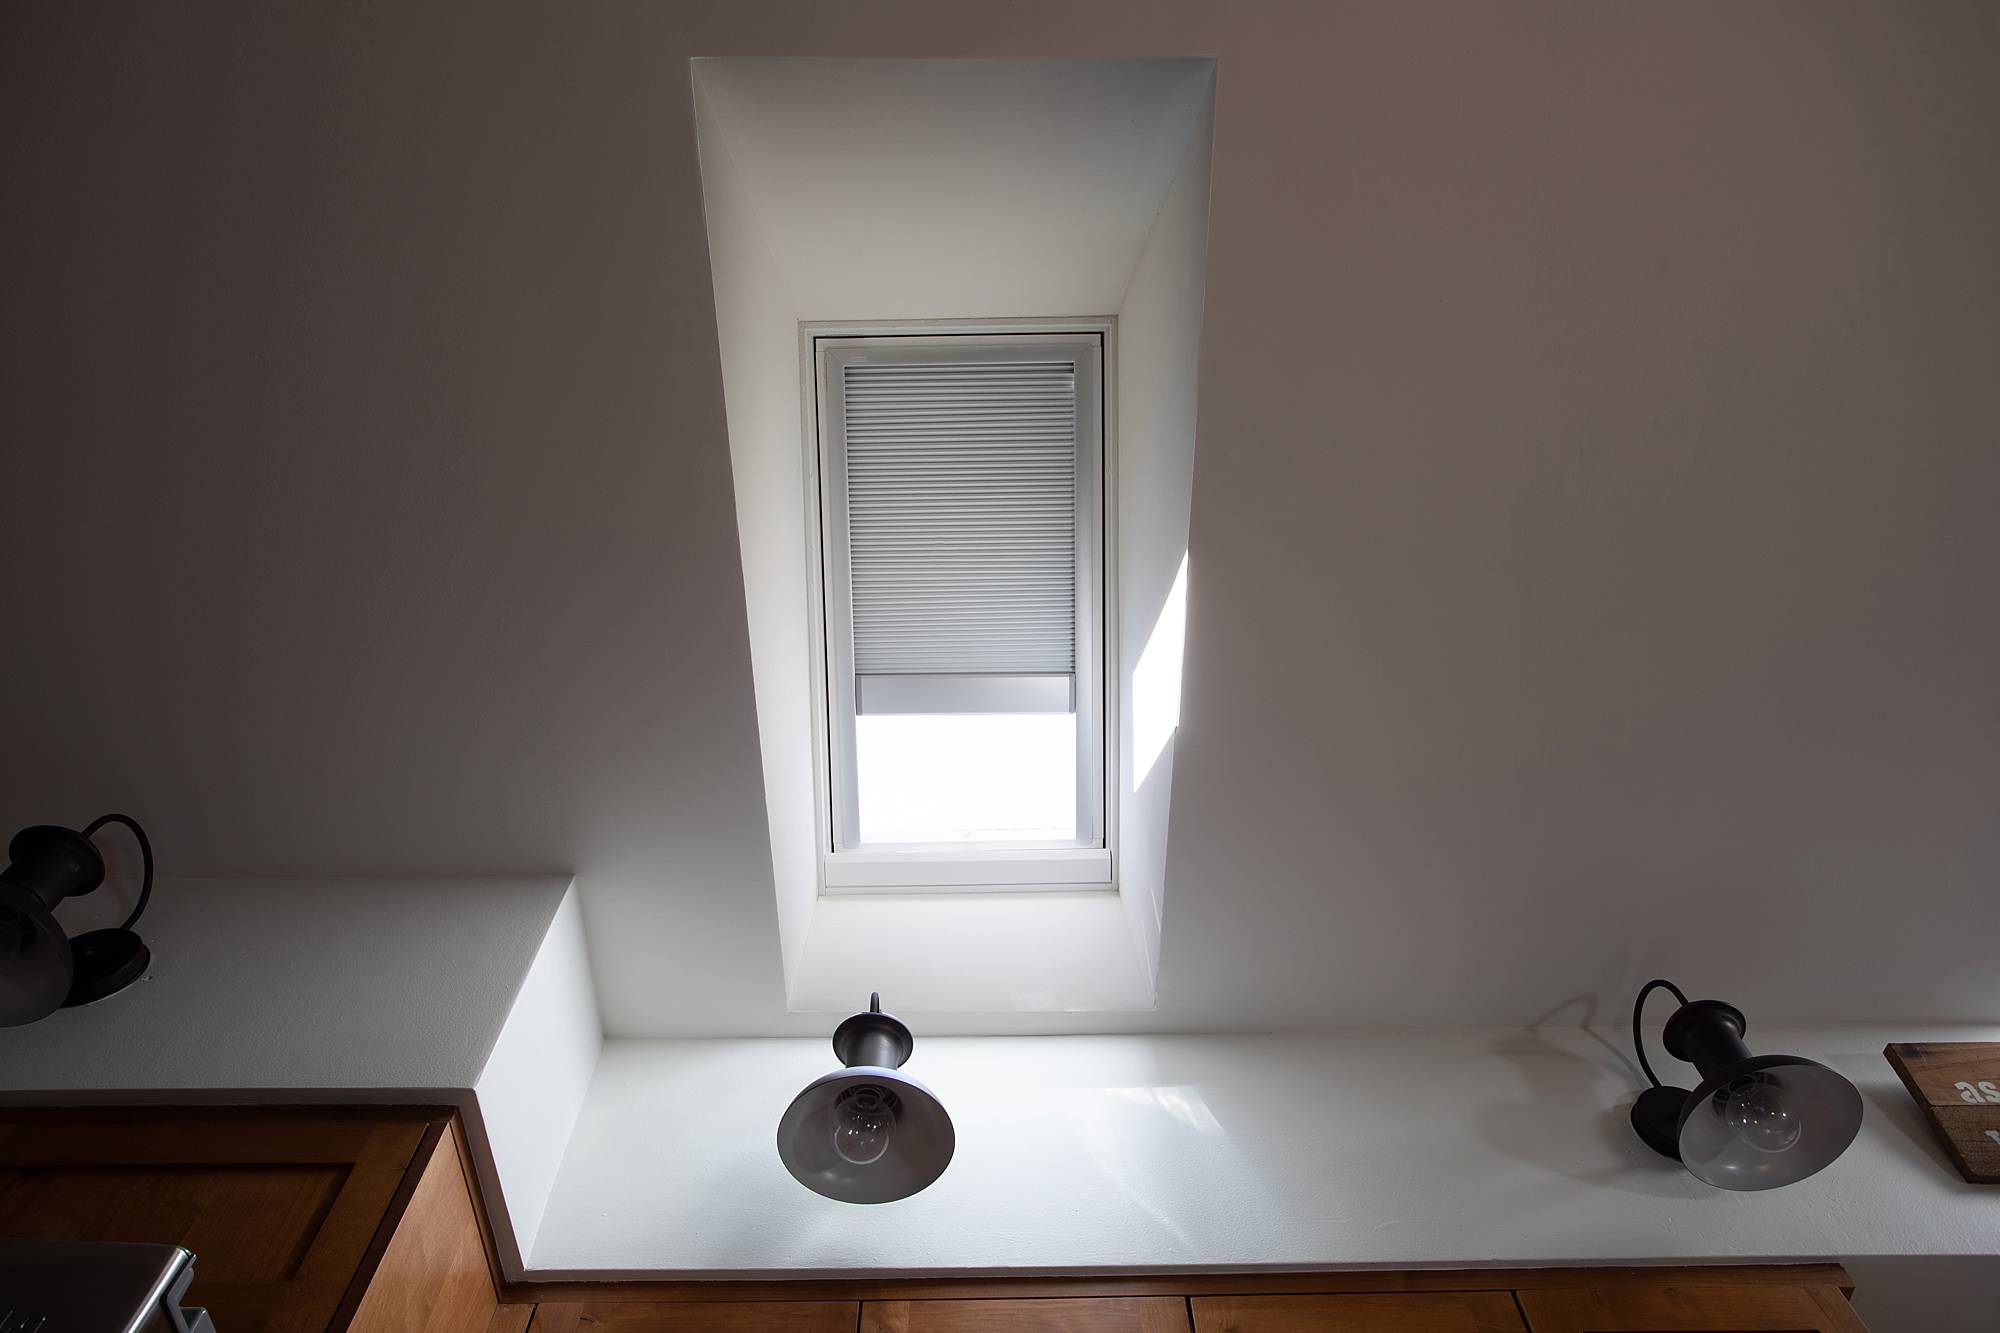 Skylights in the kitchen with VELUX - see before and after photos in this huge blog post// open up skylight